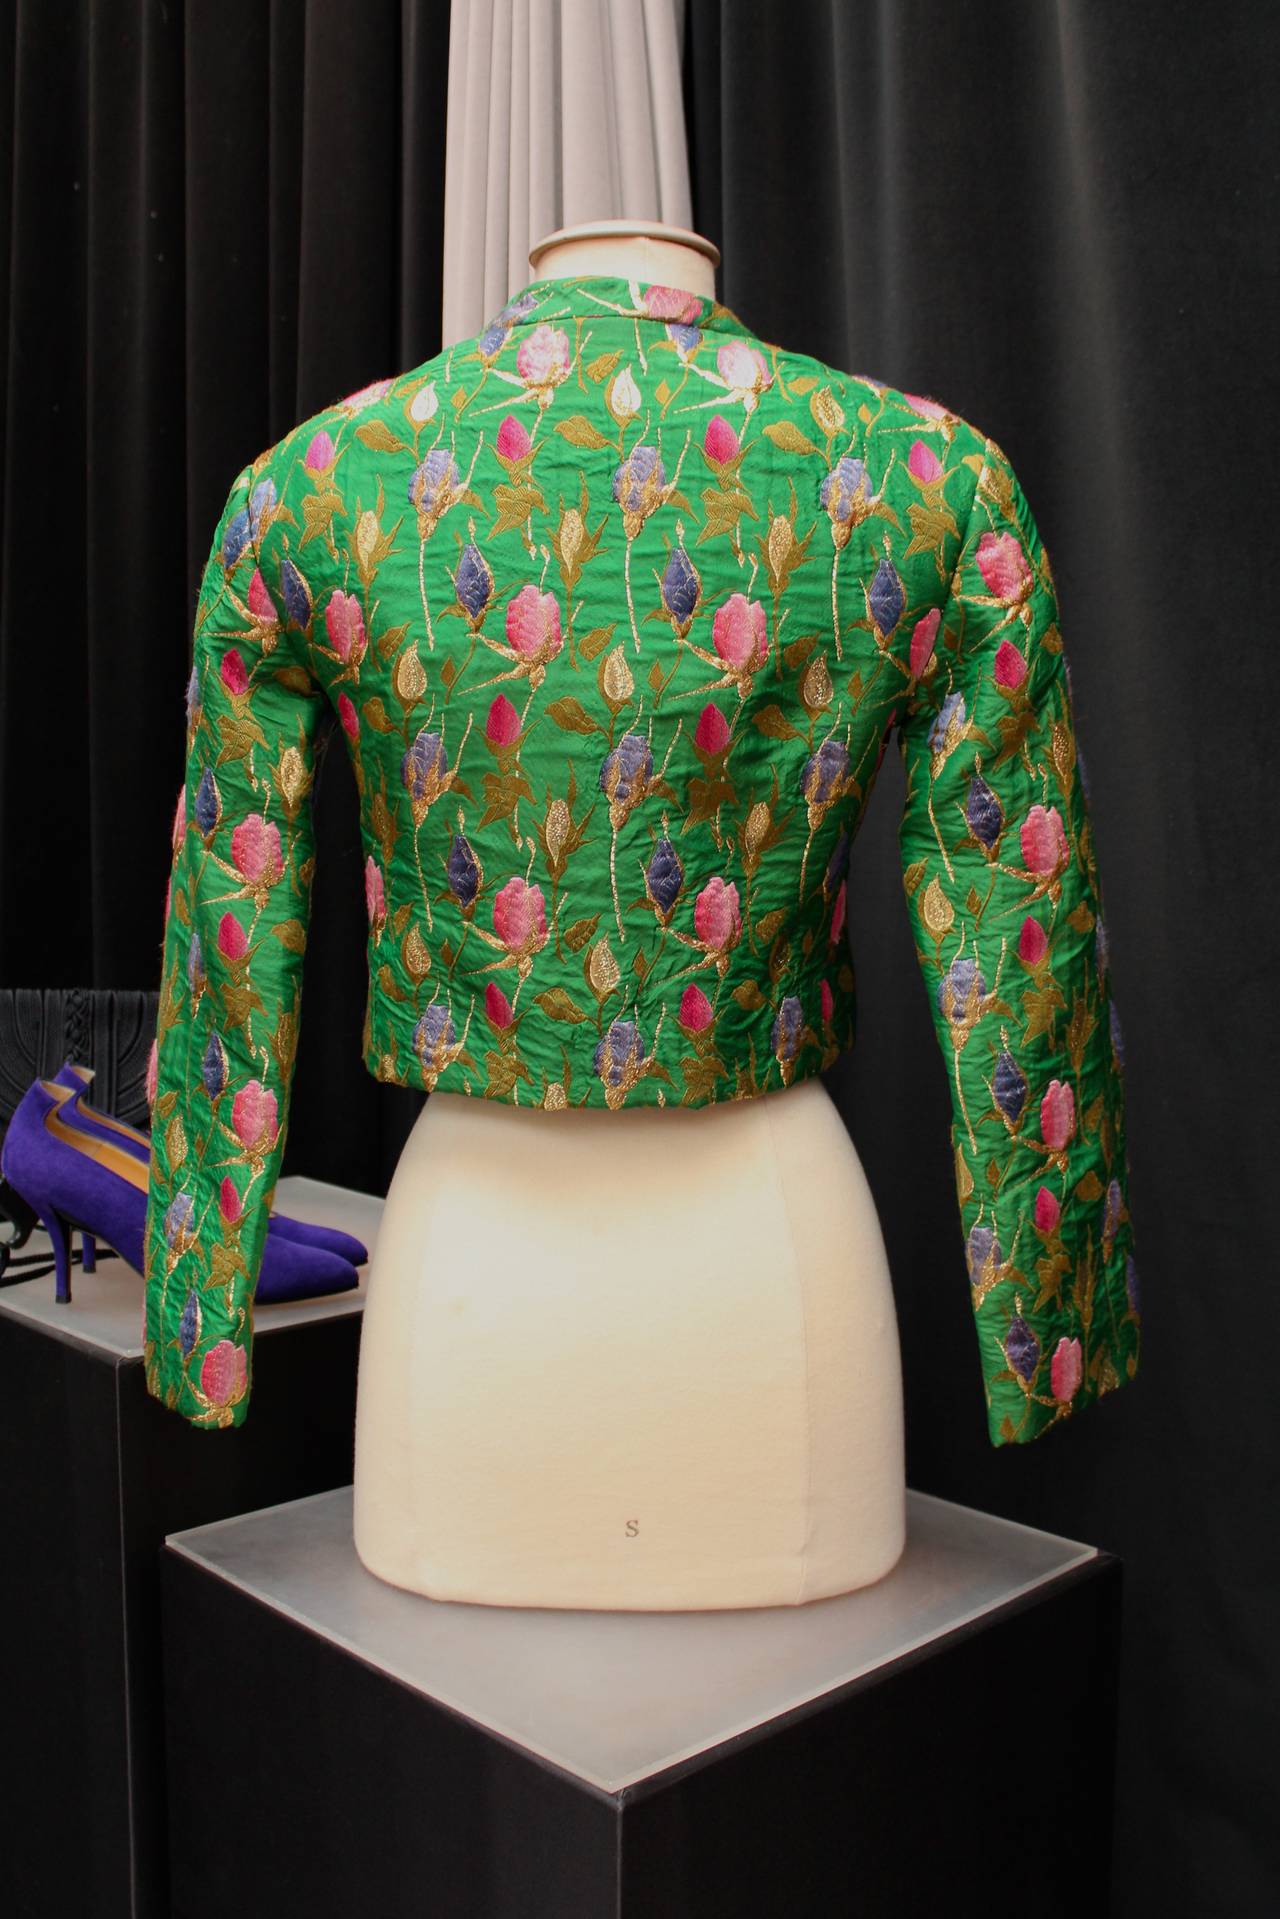 YVES SAINT LAURENT BOUTIQUE (Made in France) Short handmade Couture Jacket from the 1960's composed of green silk taffeta embroidered with silk thread featuring purple, pink, fuchsia and lame flower buds. The long sleeves jacket closes with a